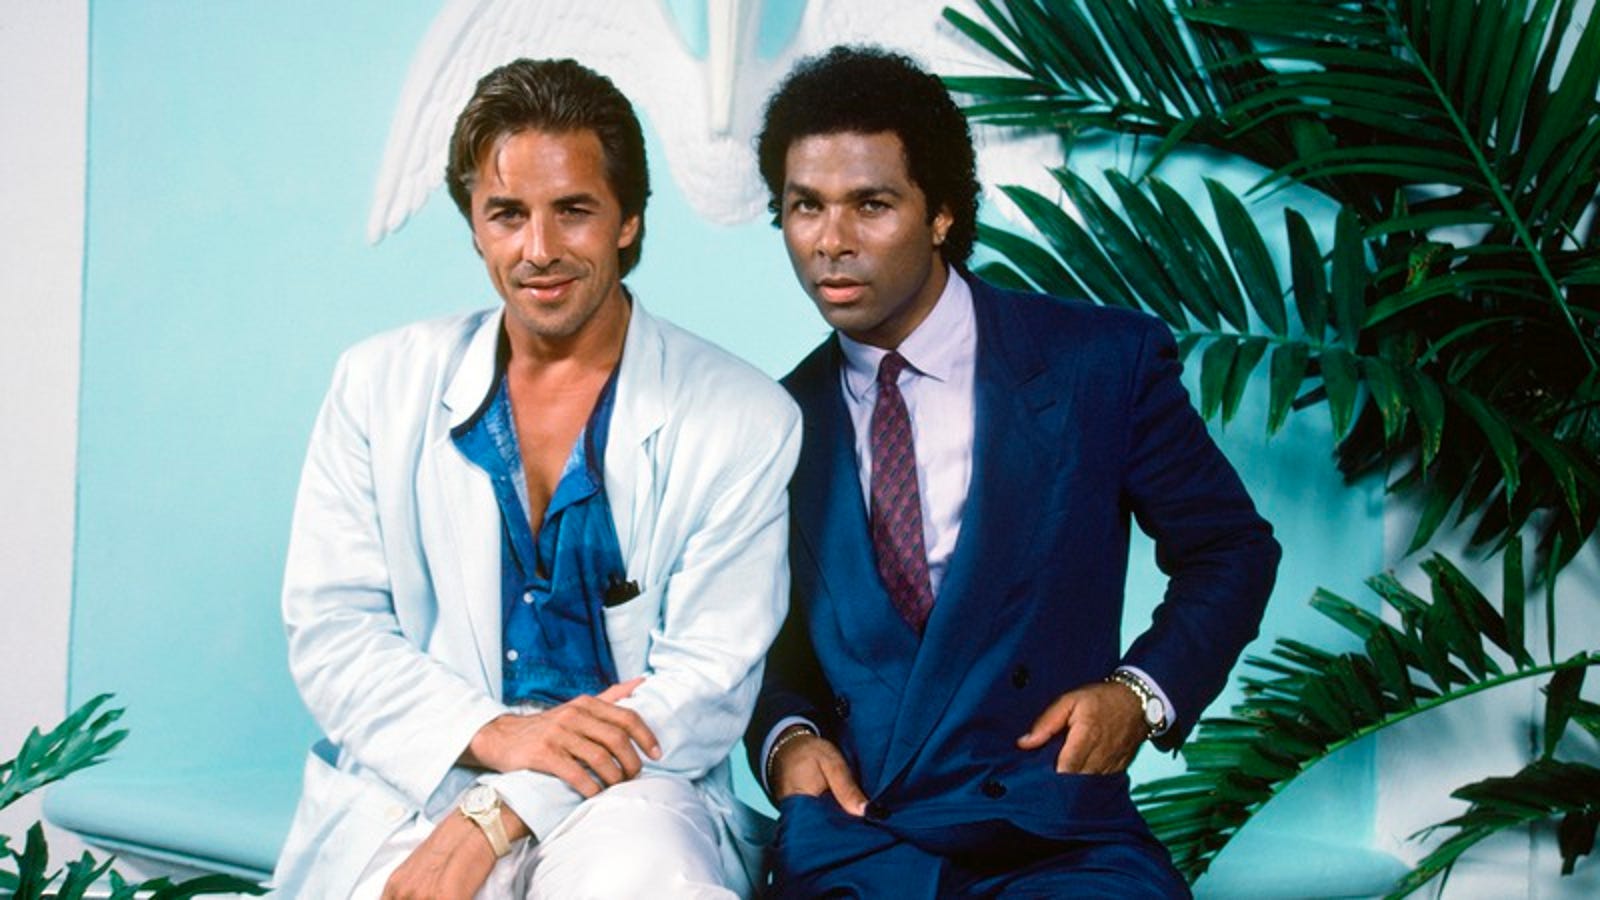 Miami Vice reboot to reflect today’s sexy cops, cocaine, and Phil Collins